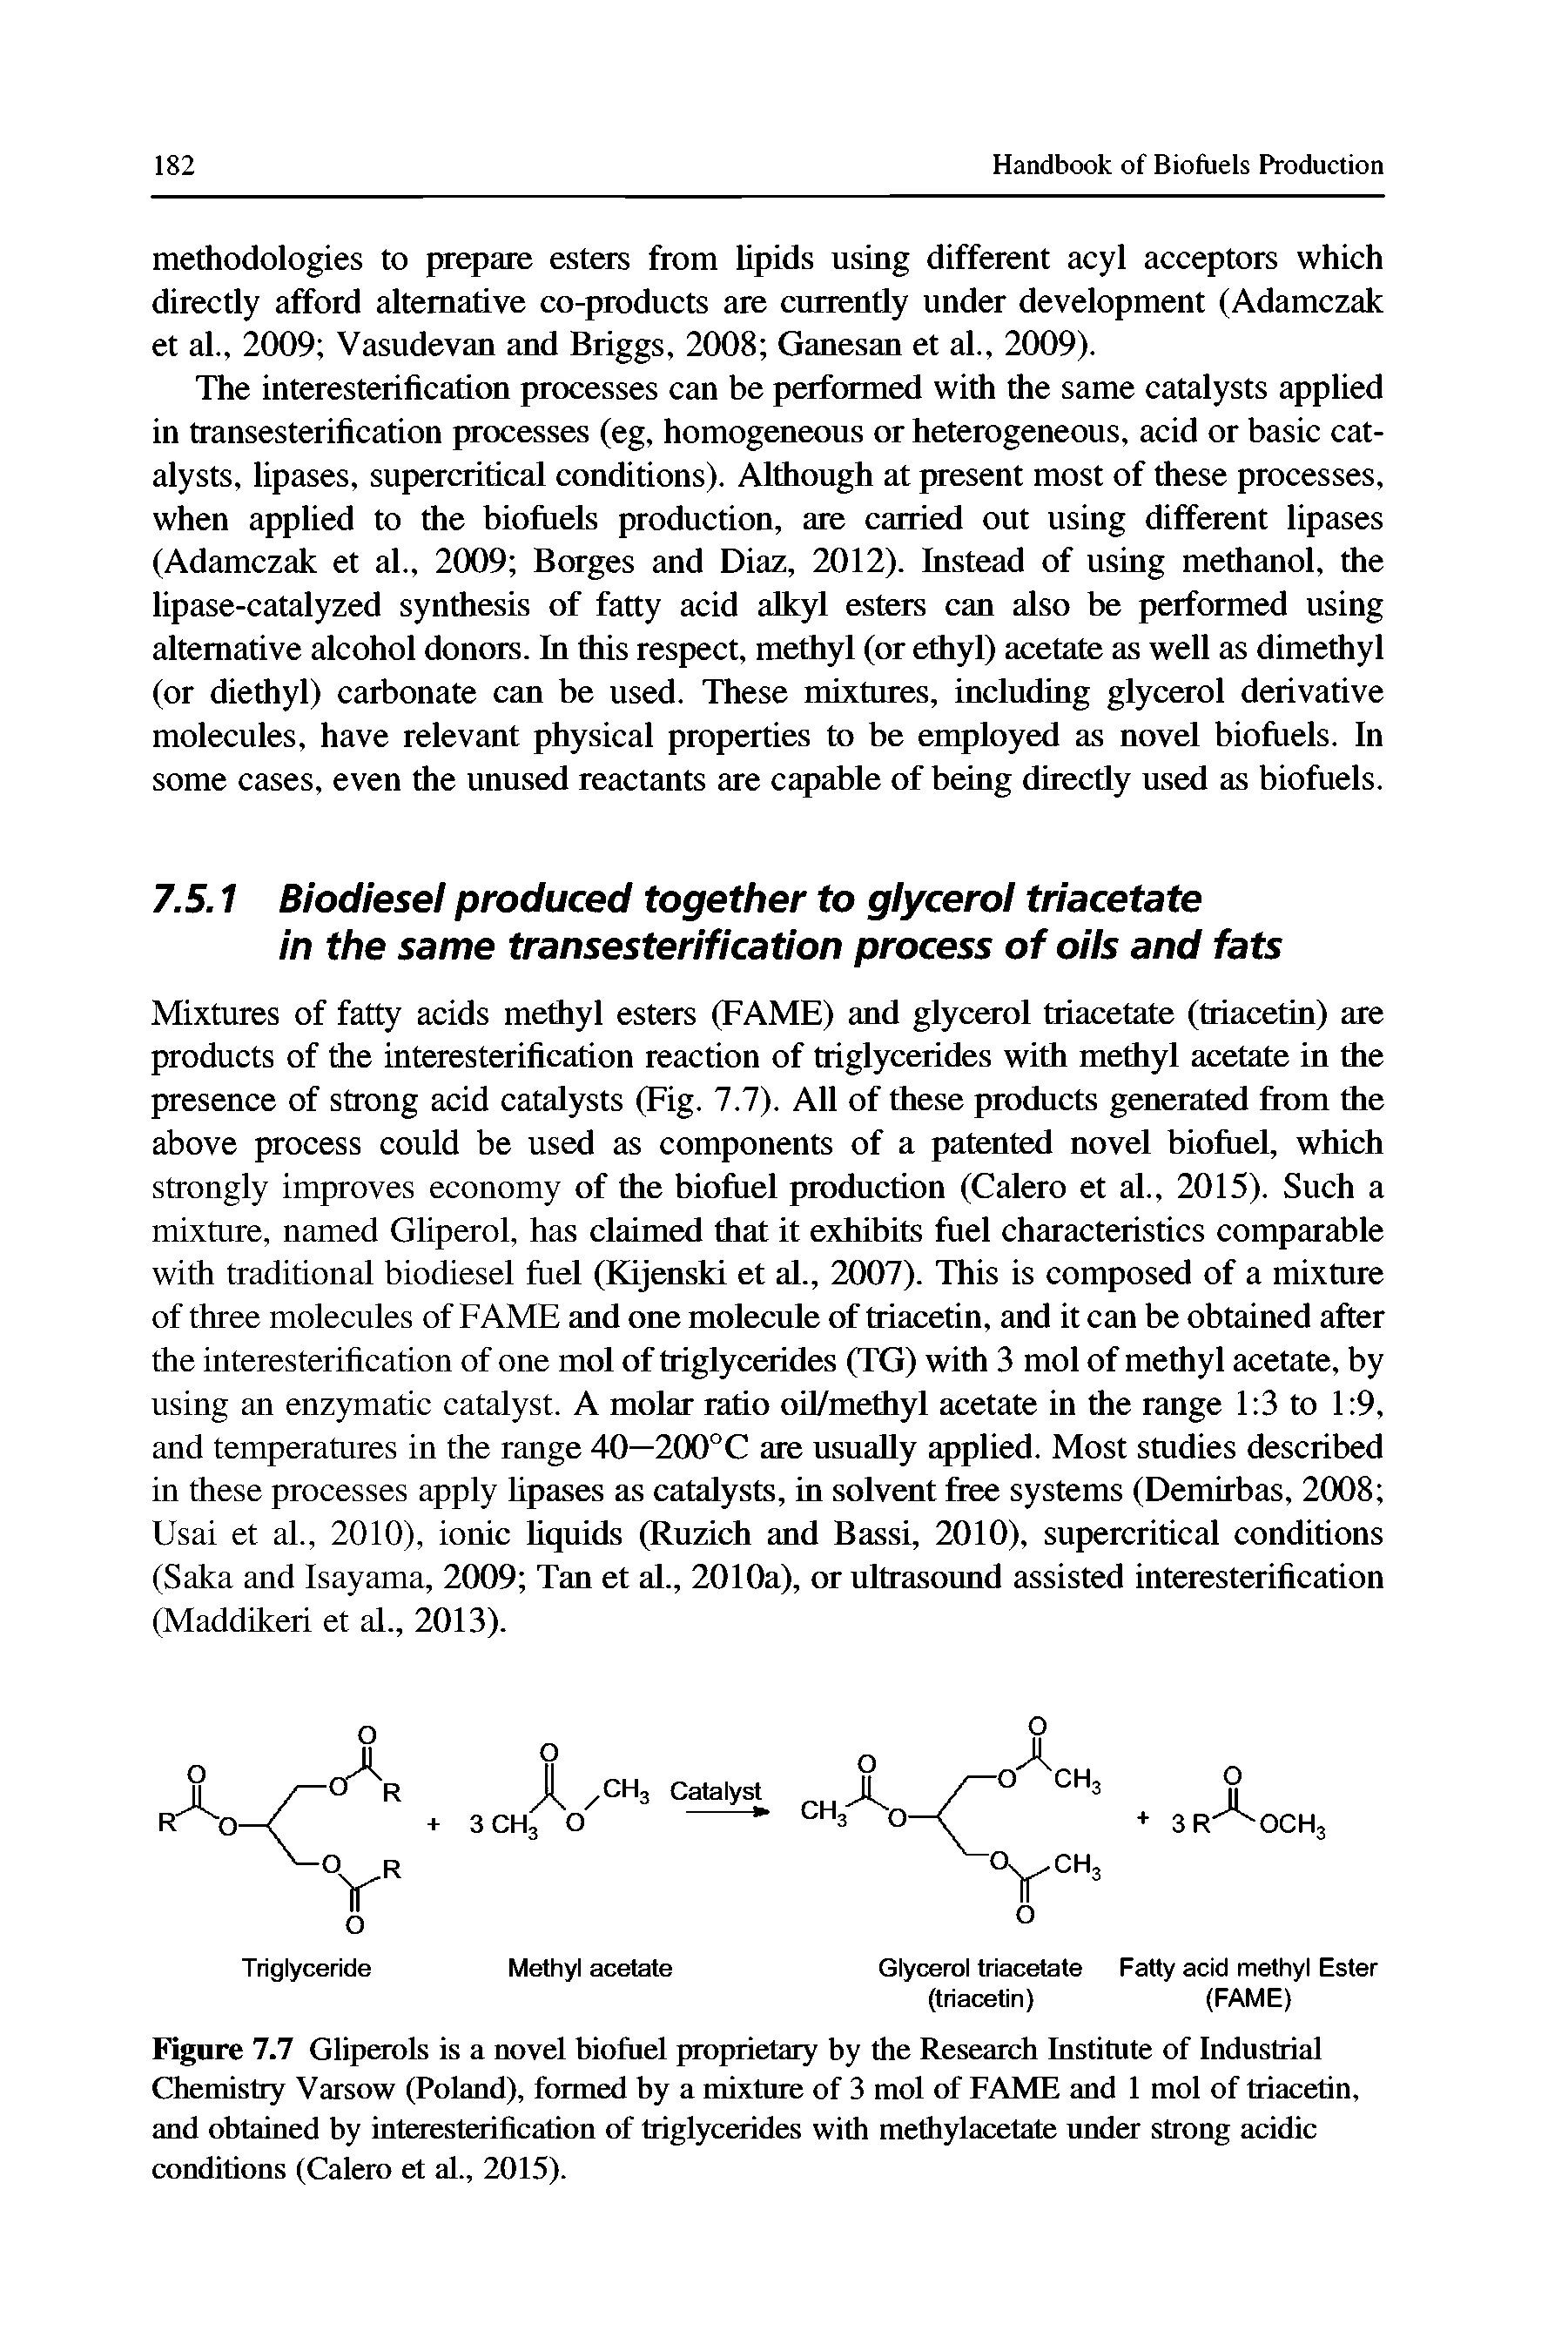 Figure 7.7 Gliperols is a novel biofuel proprietary by the Research Institute of Industrial Chemistry Varsow (Poland), formed by a mixture of 3 mol of FAME and 1 mol of triacetin, and obtained by interesterification of triglycerides with methylacetate under strong acidic conditions (Calero et al., 2015).